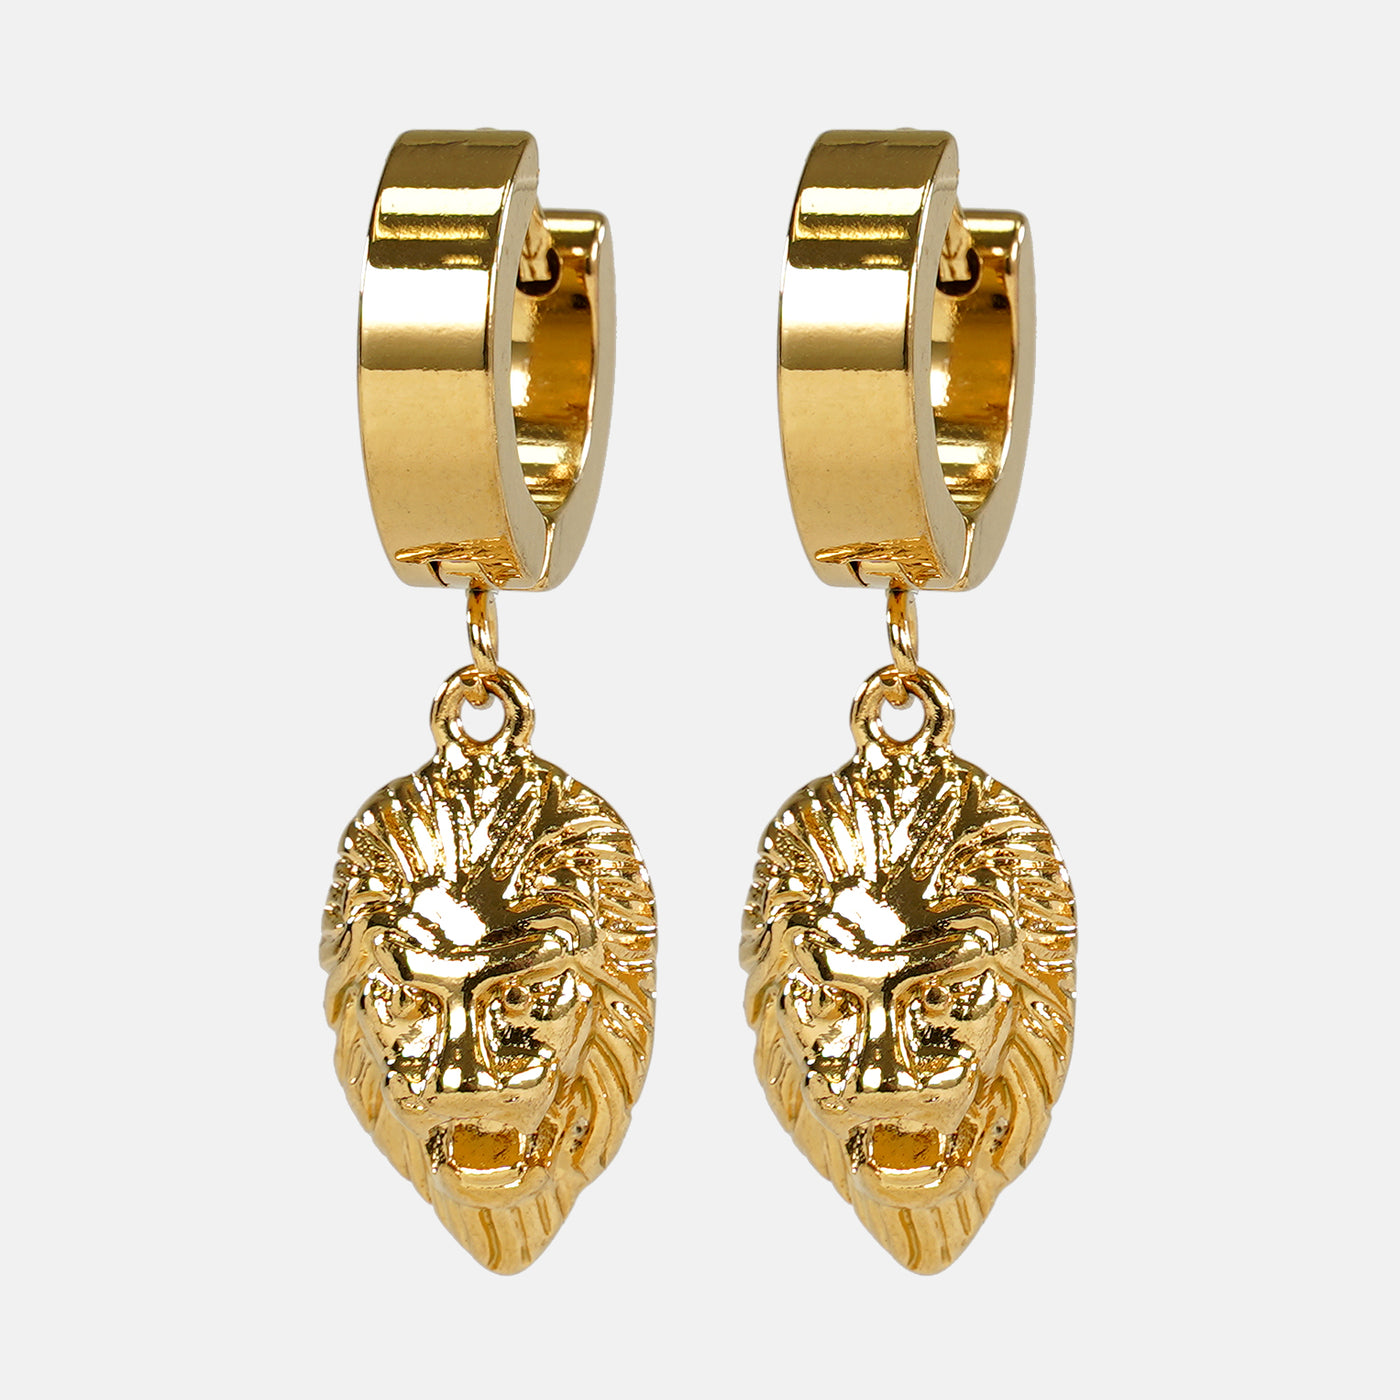 Golden Lion Earrings - Gold Plated Stainless Steel